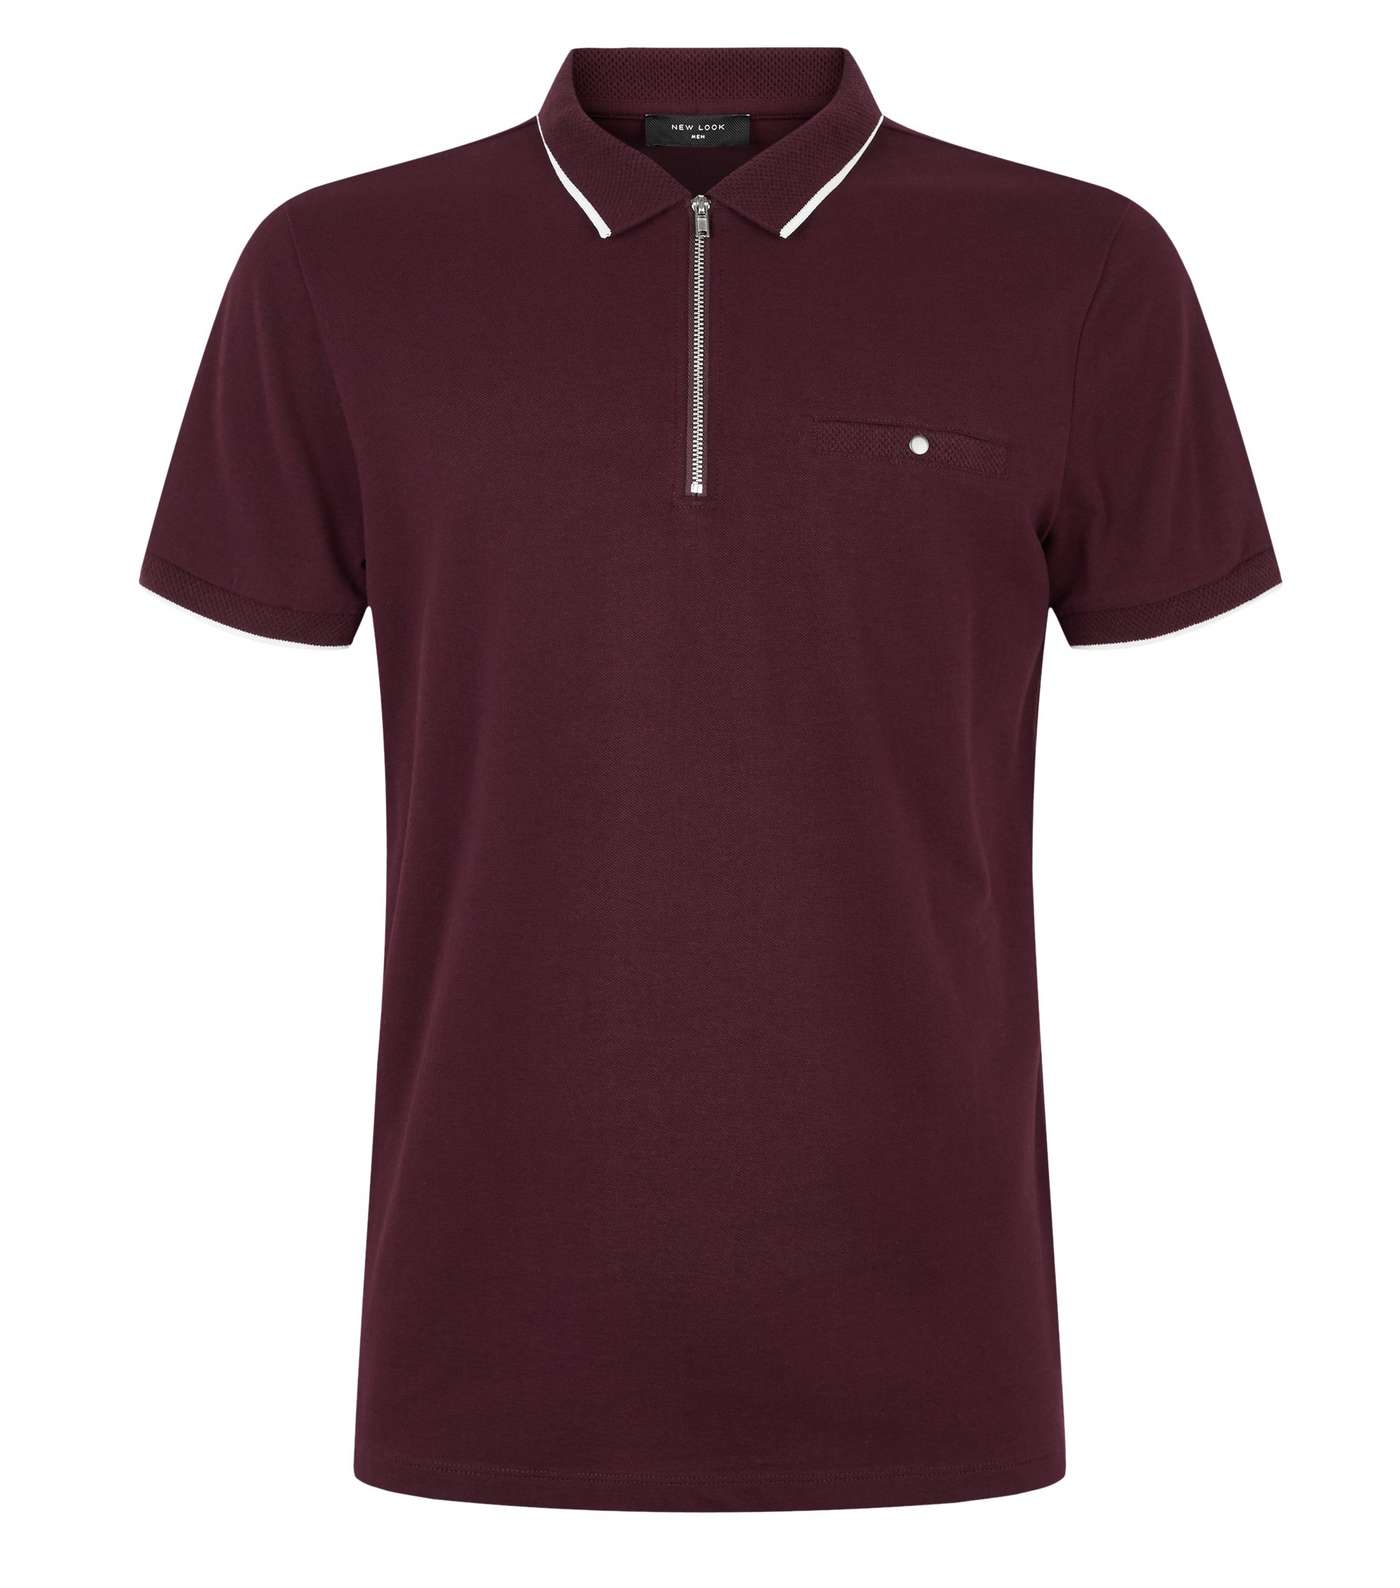 Burgundy Tipped Zip Front Polo Shirt Image 4